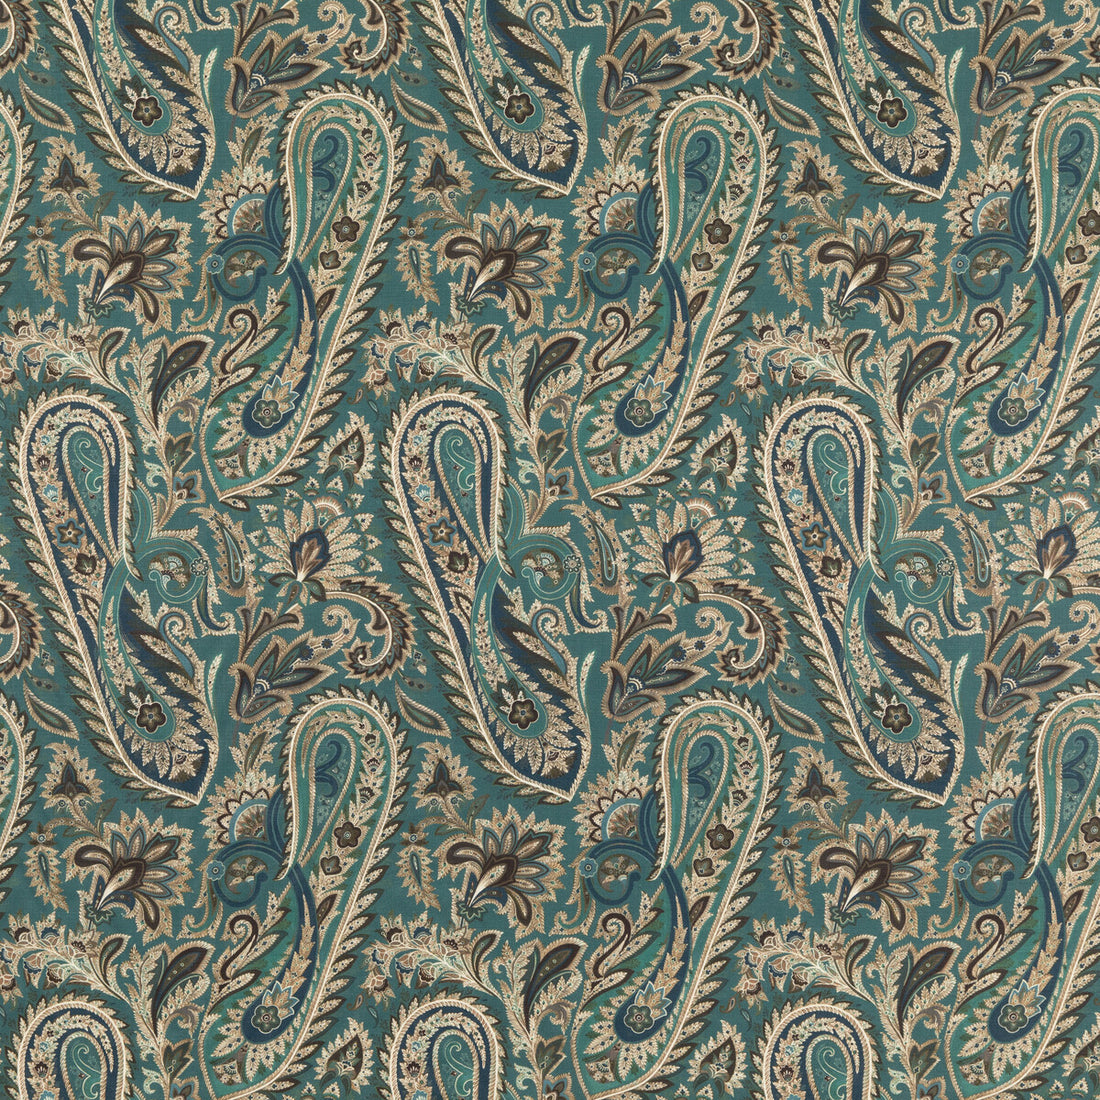 Hoxley fabric in teal color - pattern FD302.R122.0 - by Mulberry in the Modern Country I collection